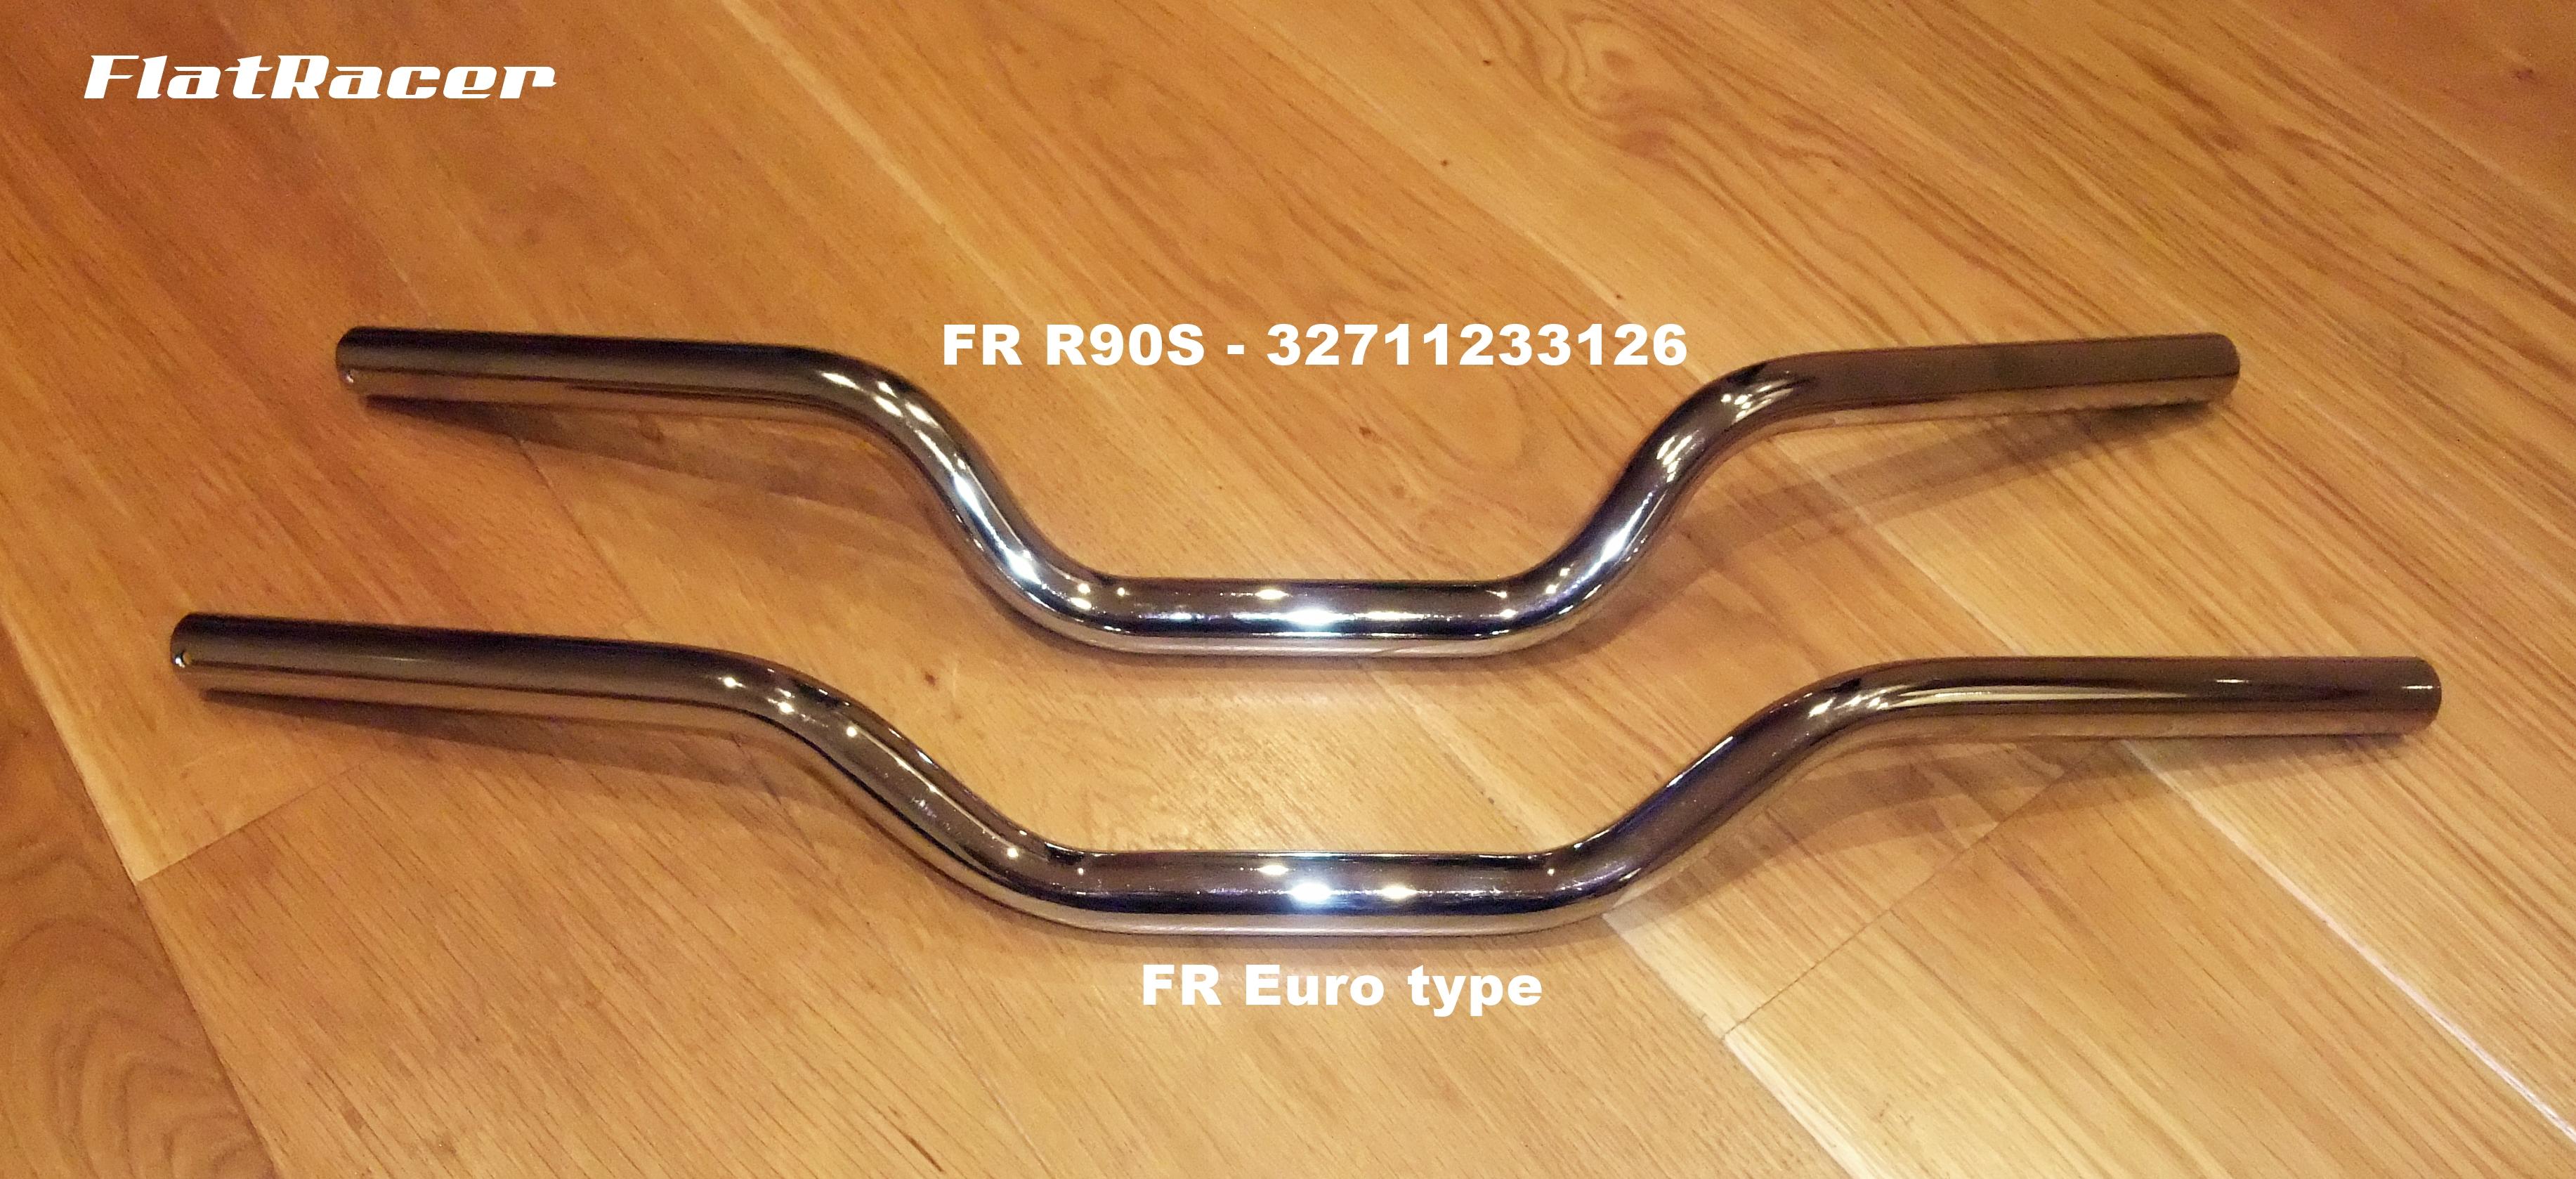 FlatRacer BMW R90S replica handlebar - 32711233126 (superseded now by 32712303042)